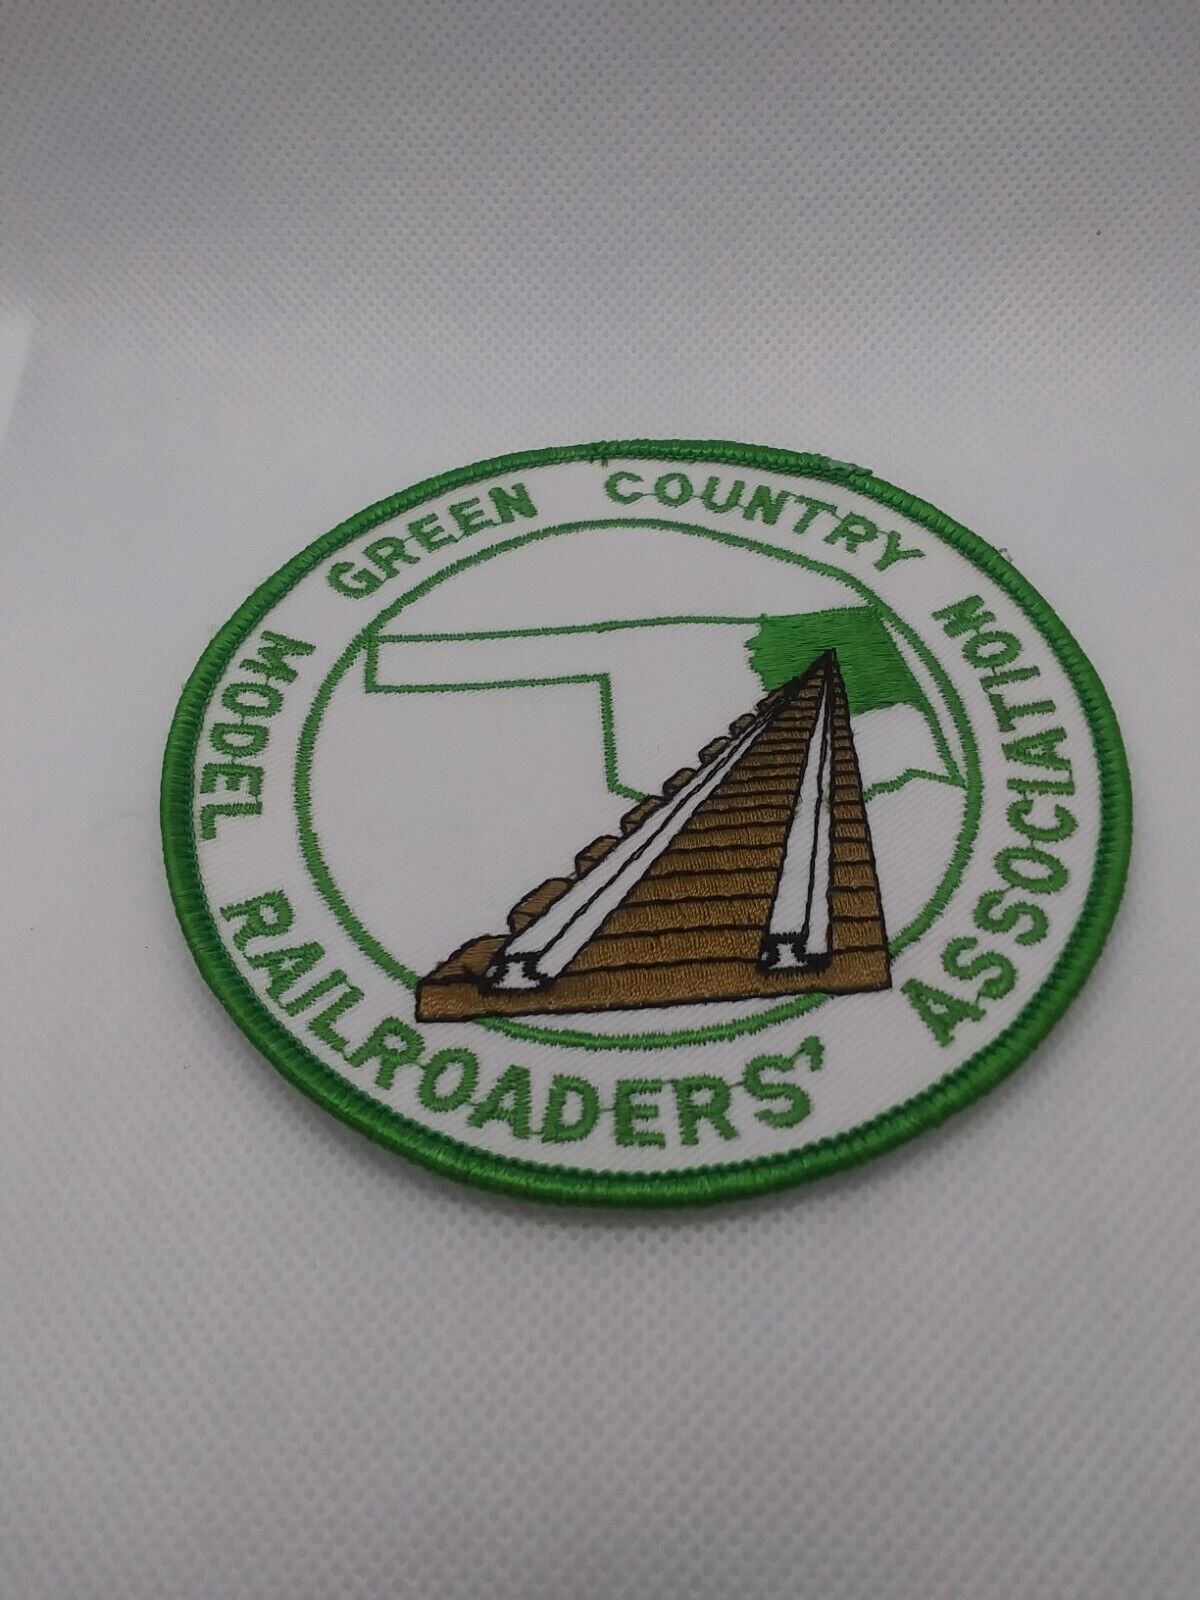 Green Country Model Railroaders Association Patch